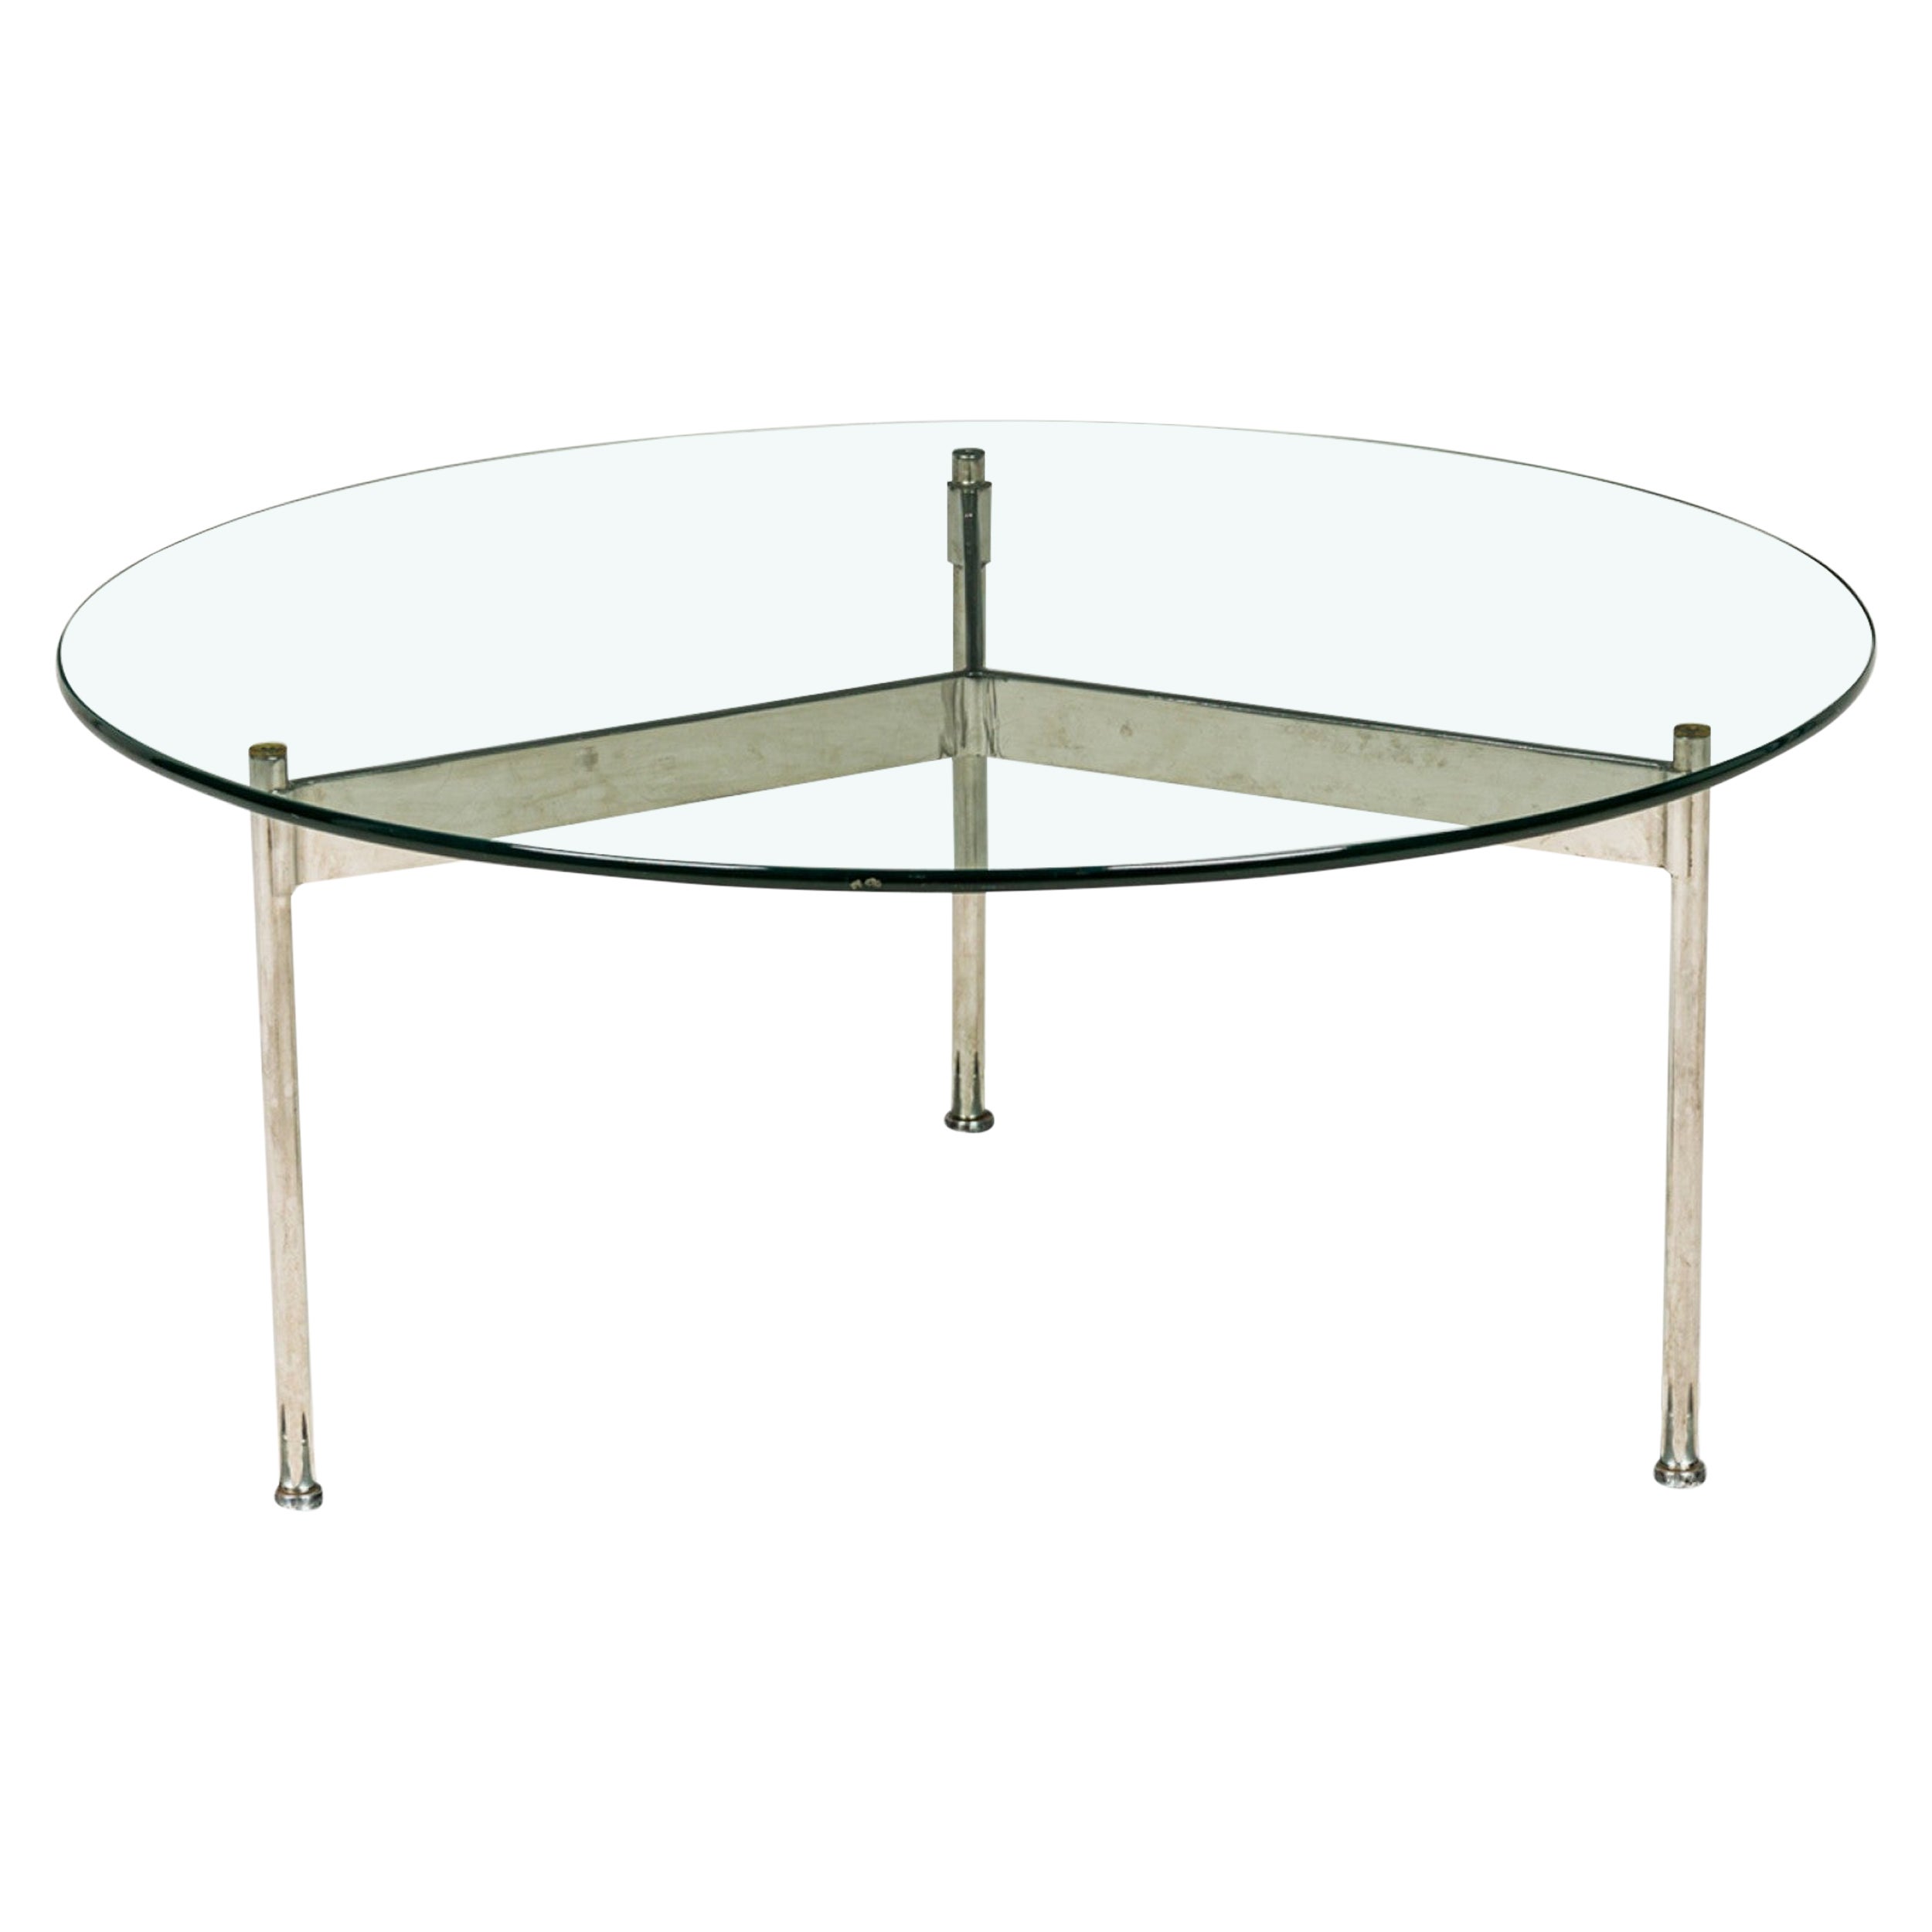 Ward Bennett  Circular Glass and Chrome Plated Steel Coffee Table